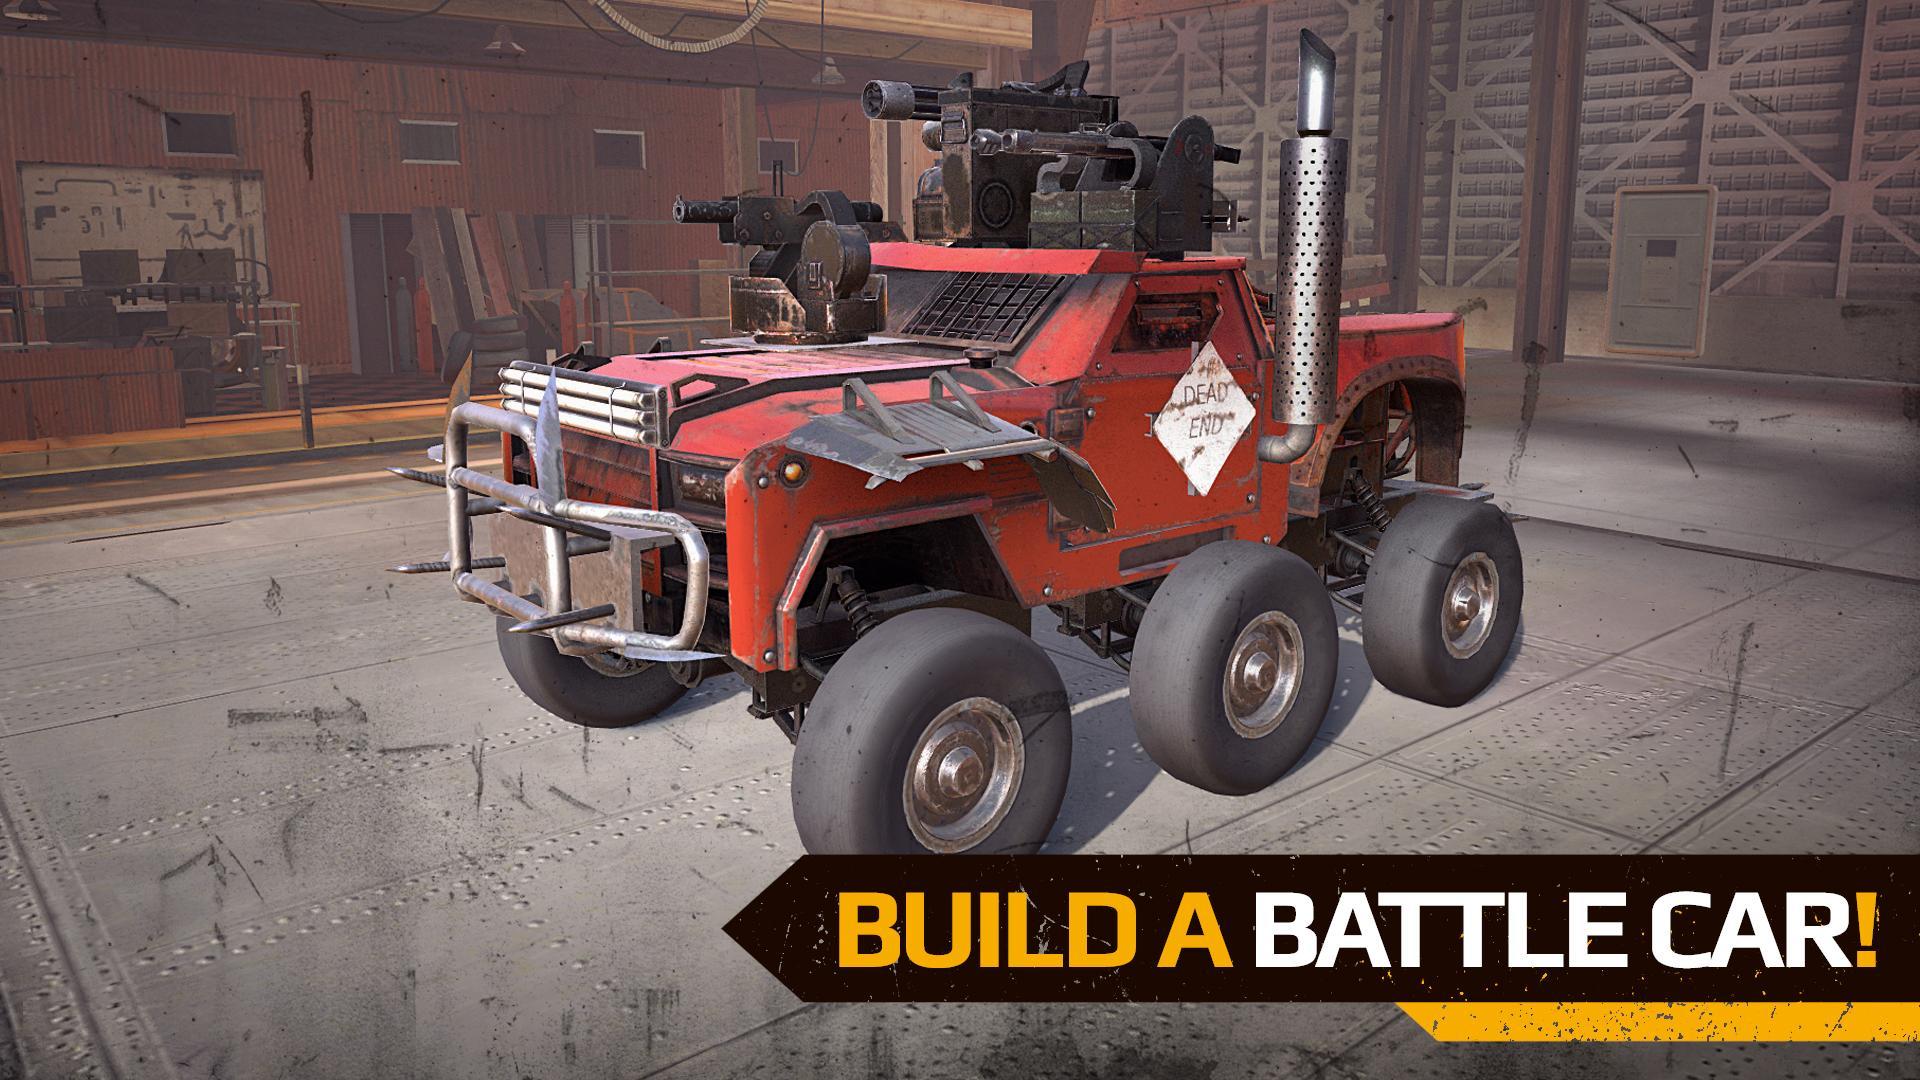 free download crossout mobile